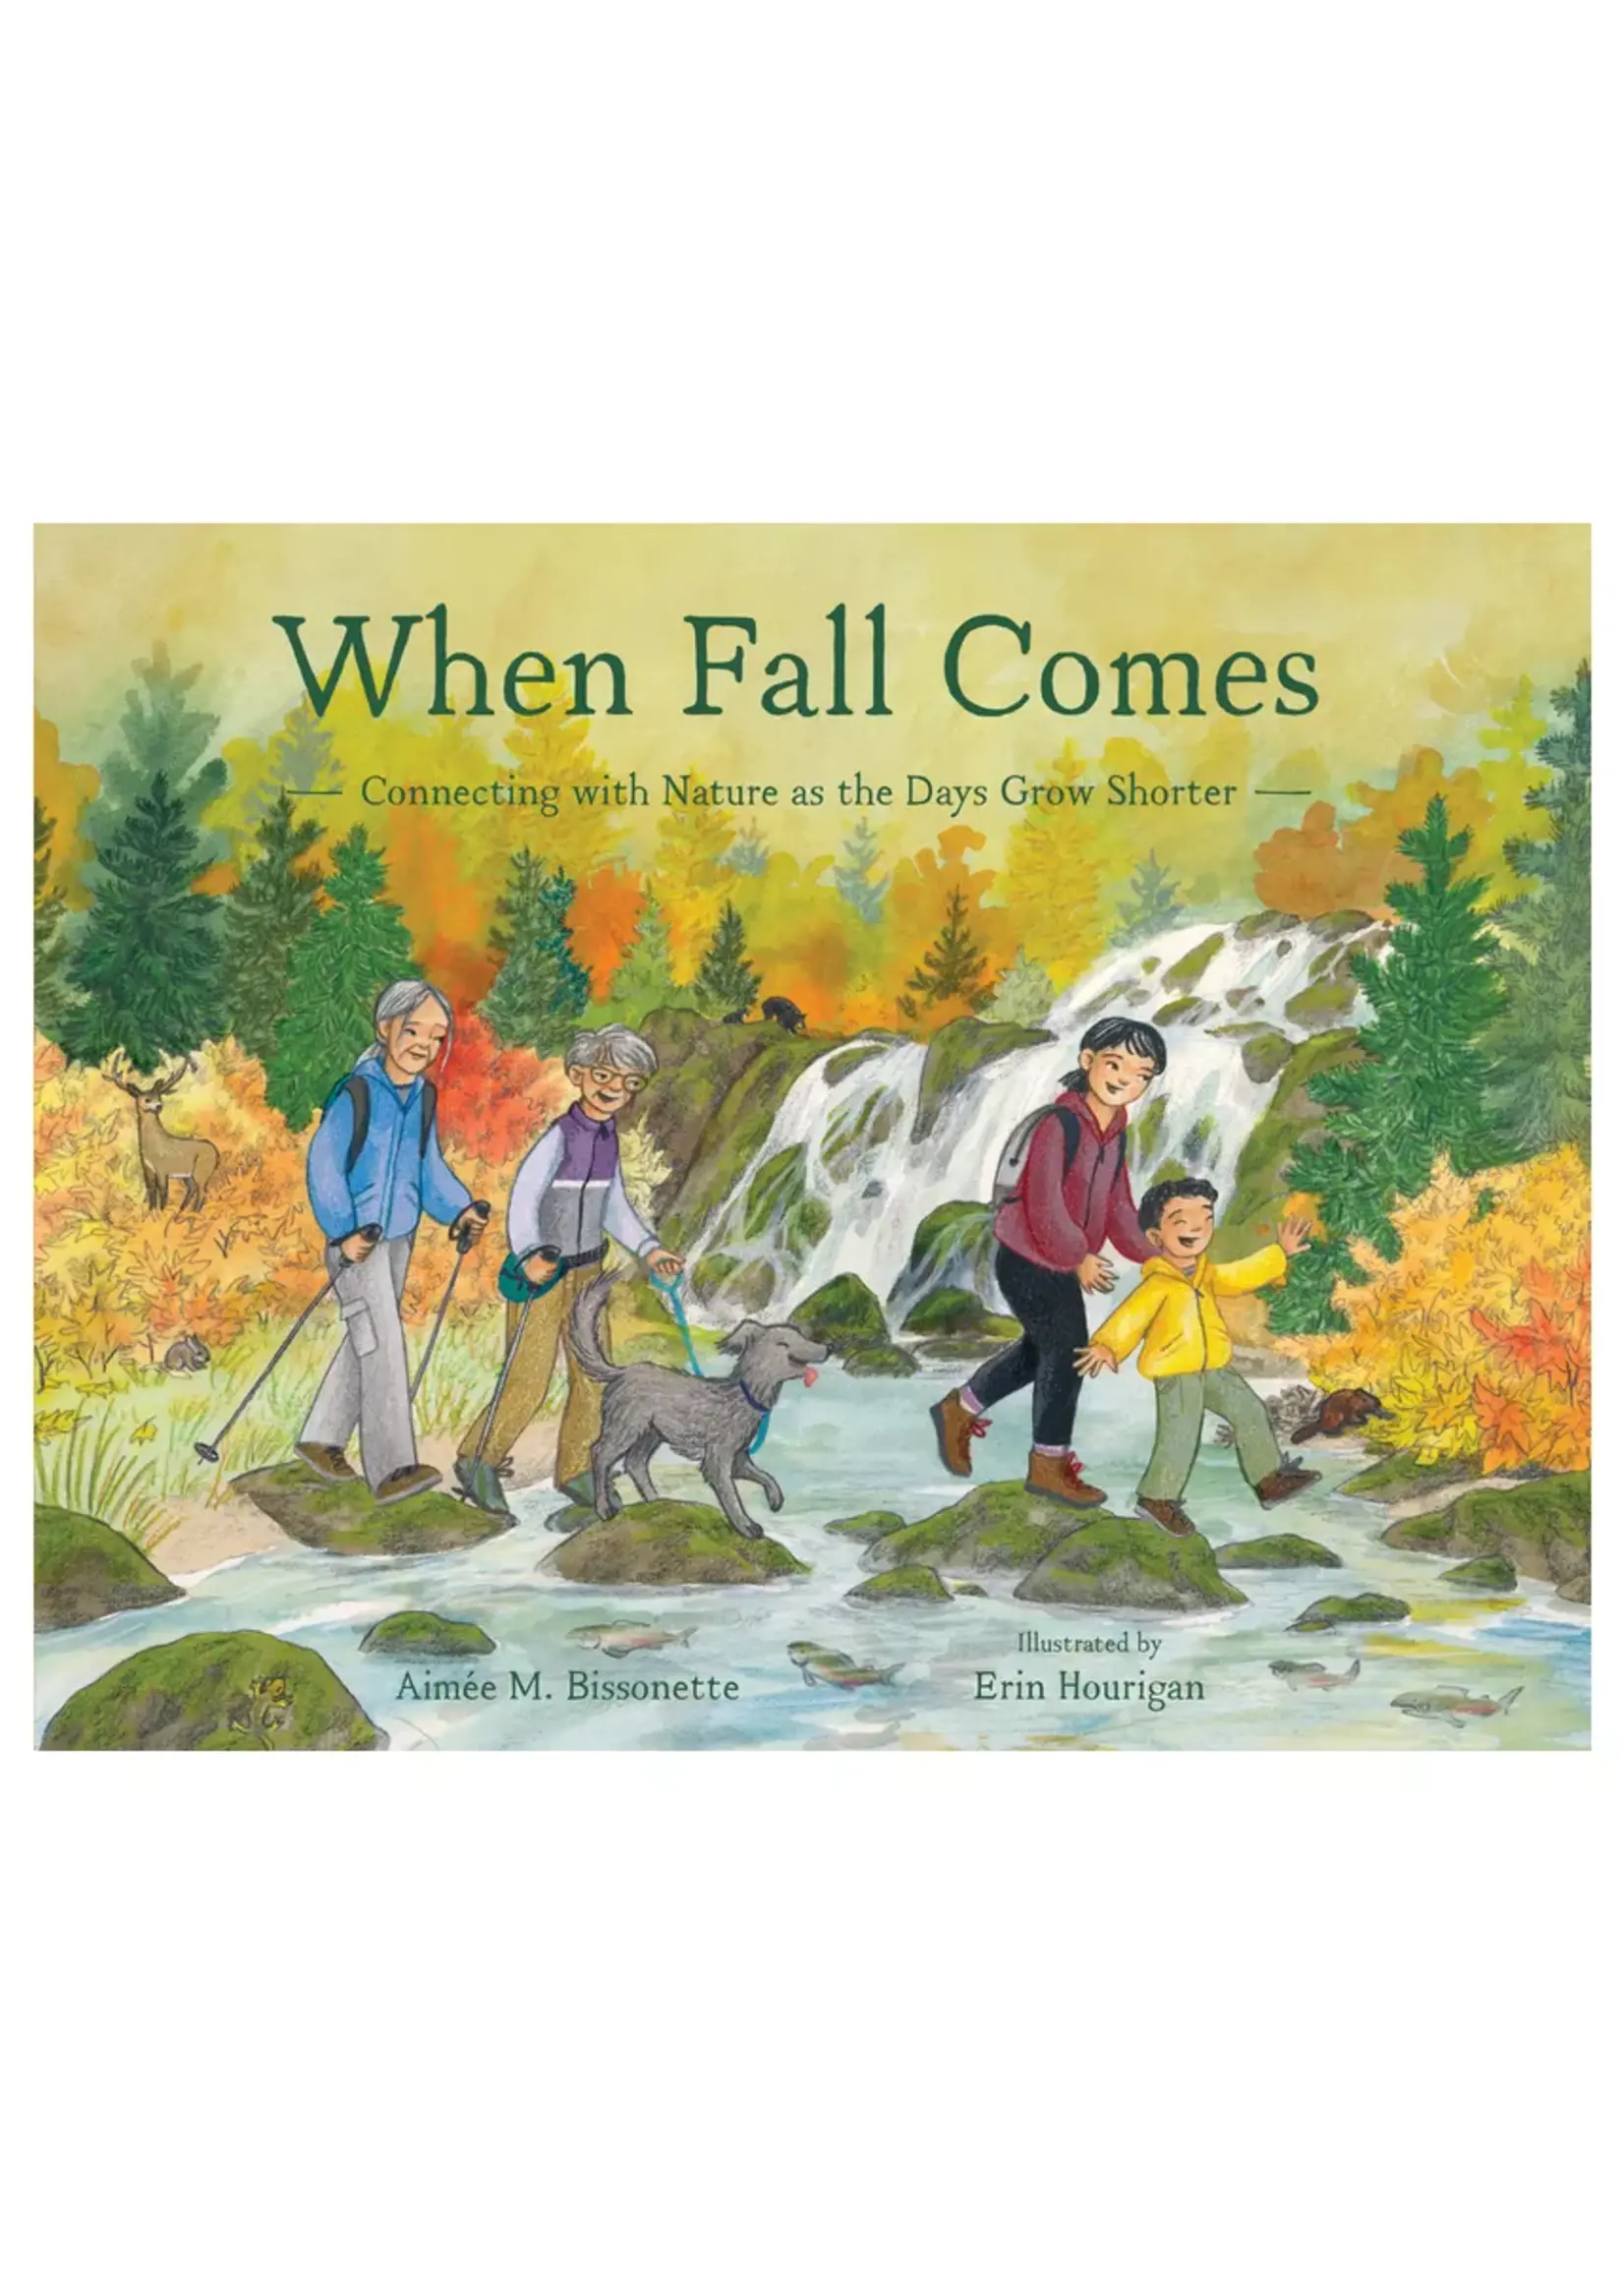 When Fall Comes: Connecting with Nature as the Days Grow Shorter - Hardcover